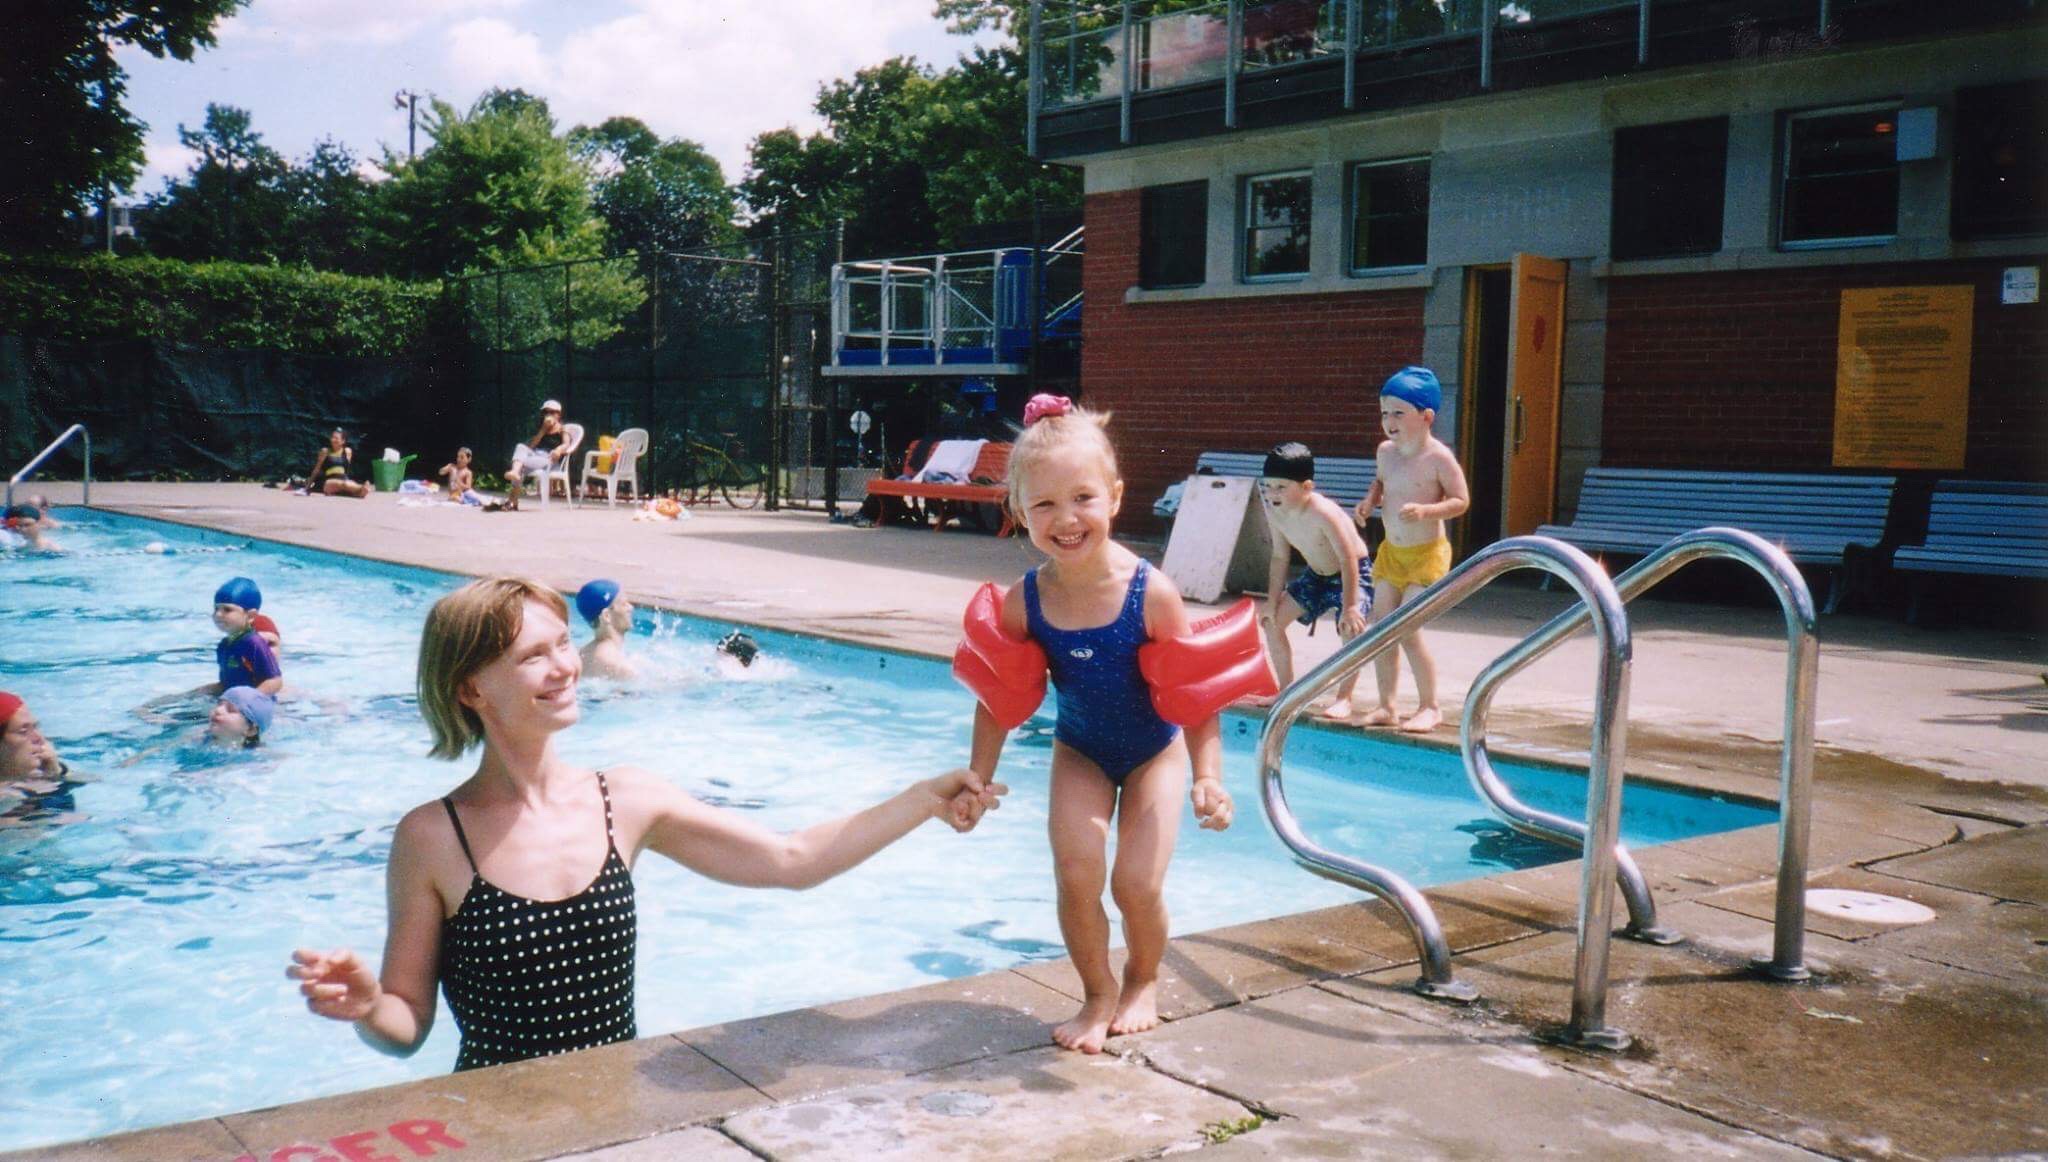 This is an old picture of my mother and I at the pool in 2003.